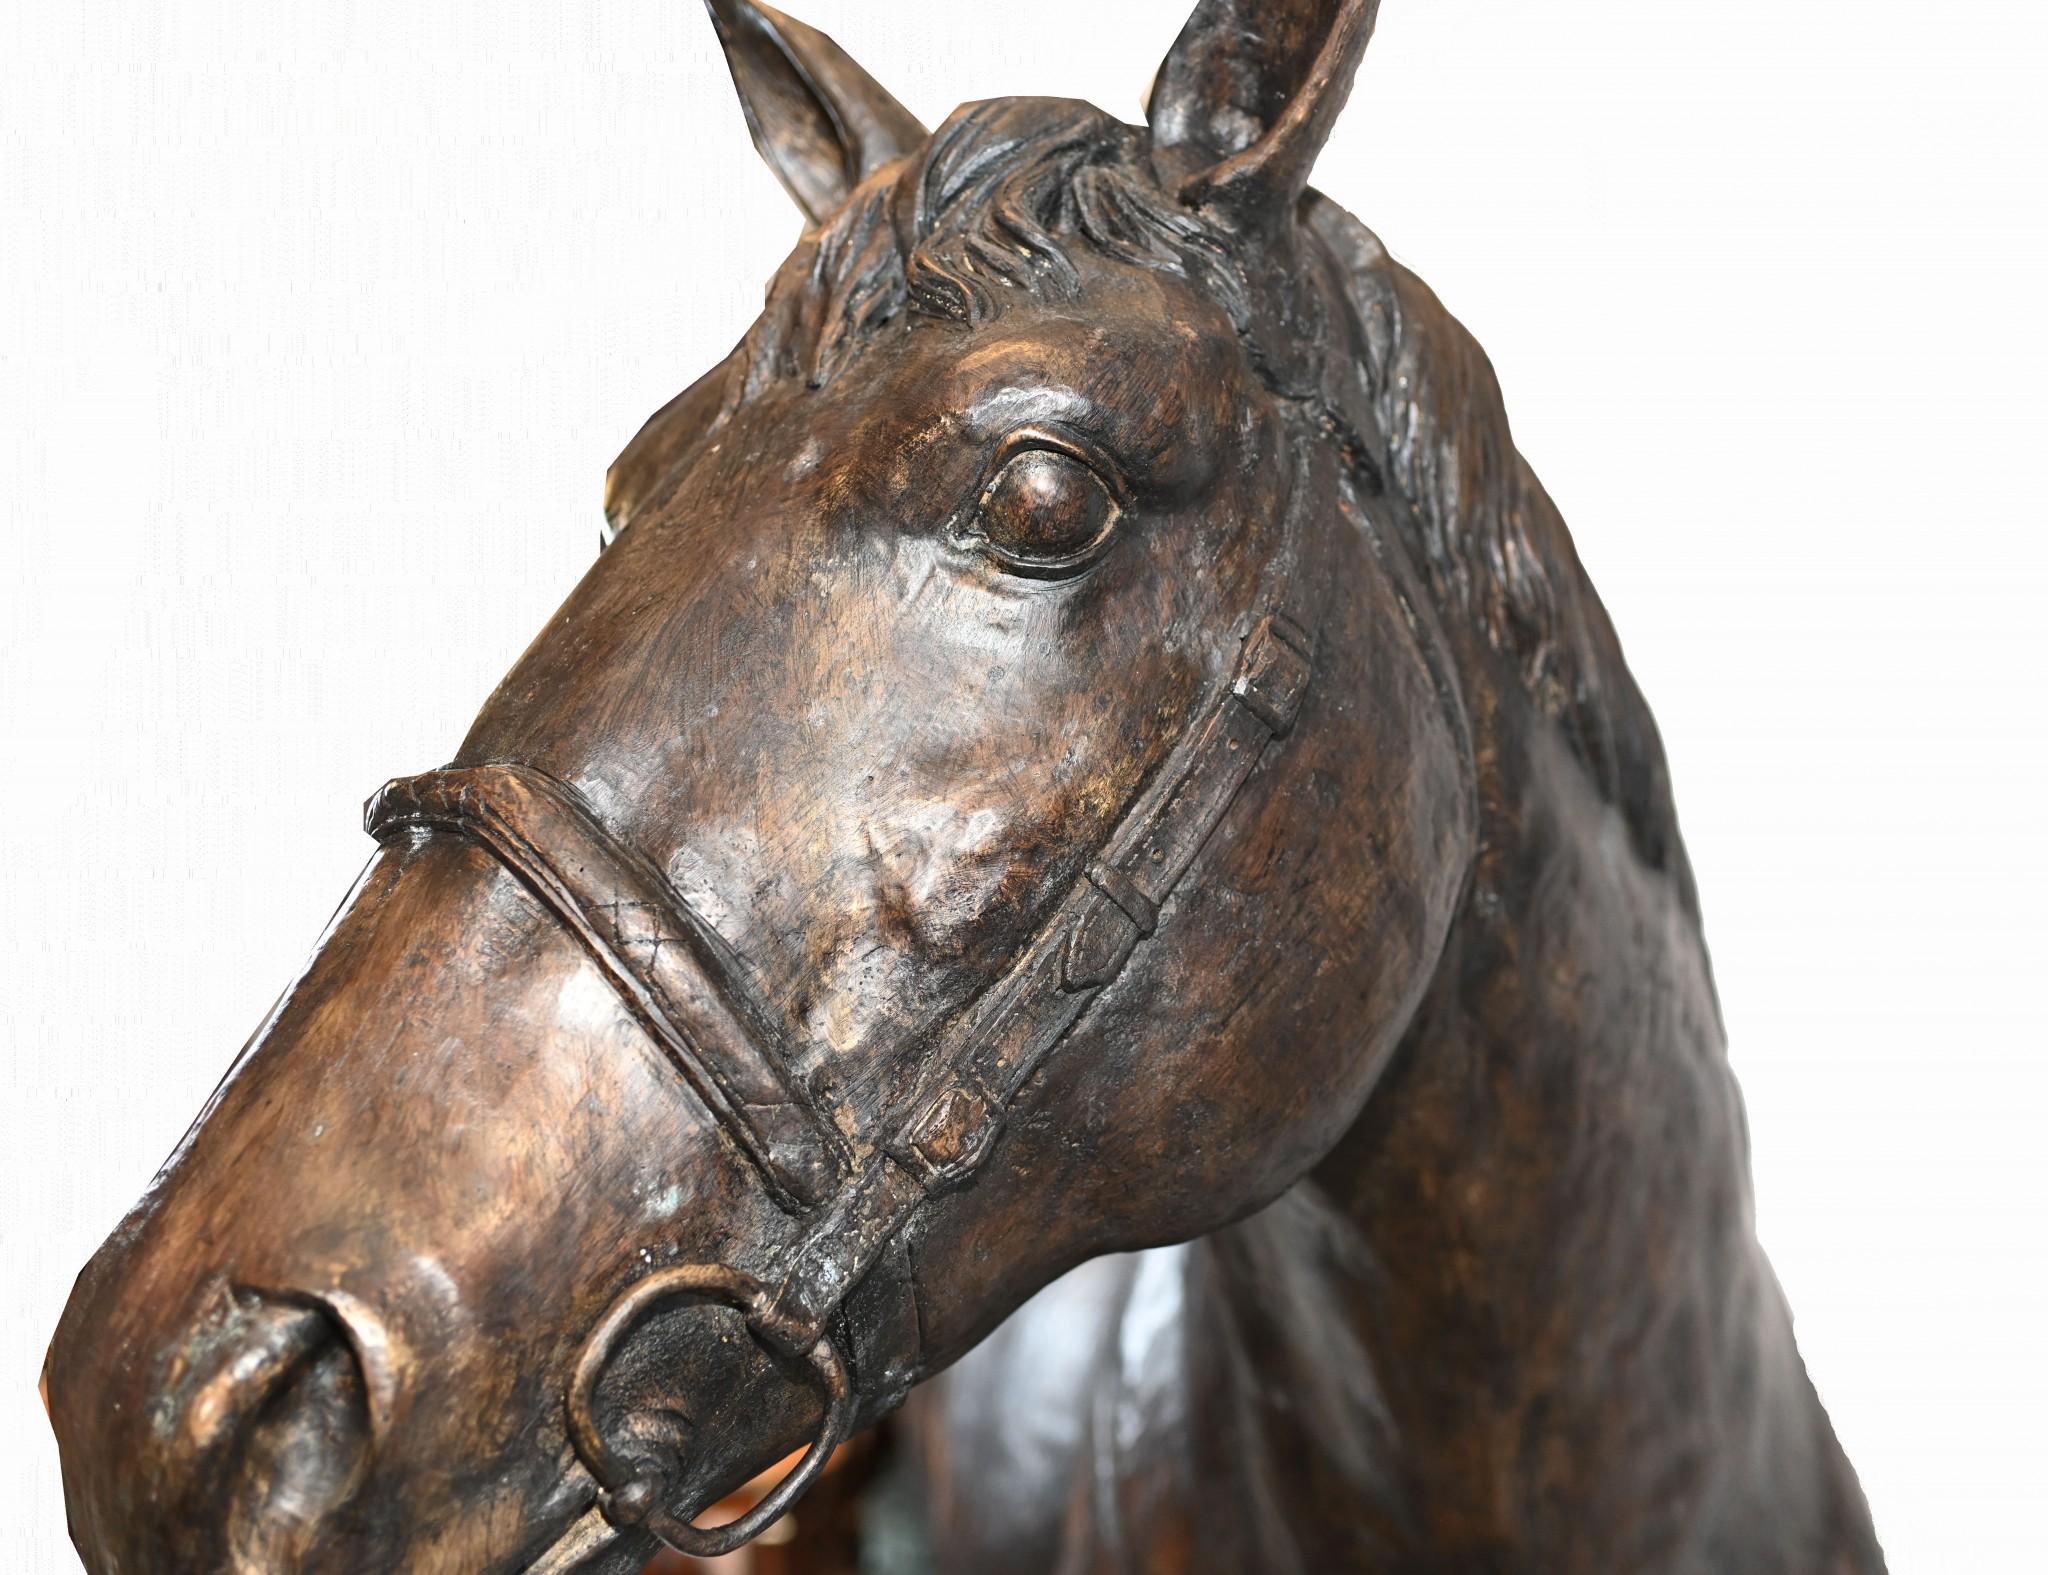 Wonderful lifesize French bronze horse
Stands in at 7 feet tall - 213 CM - so massive
Of course being bronze this can live outside with no fear of rusting
Artist has really captured the beauty to the horse, check out features like the muscletone and